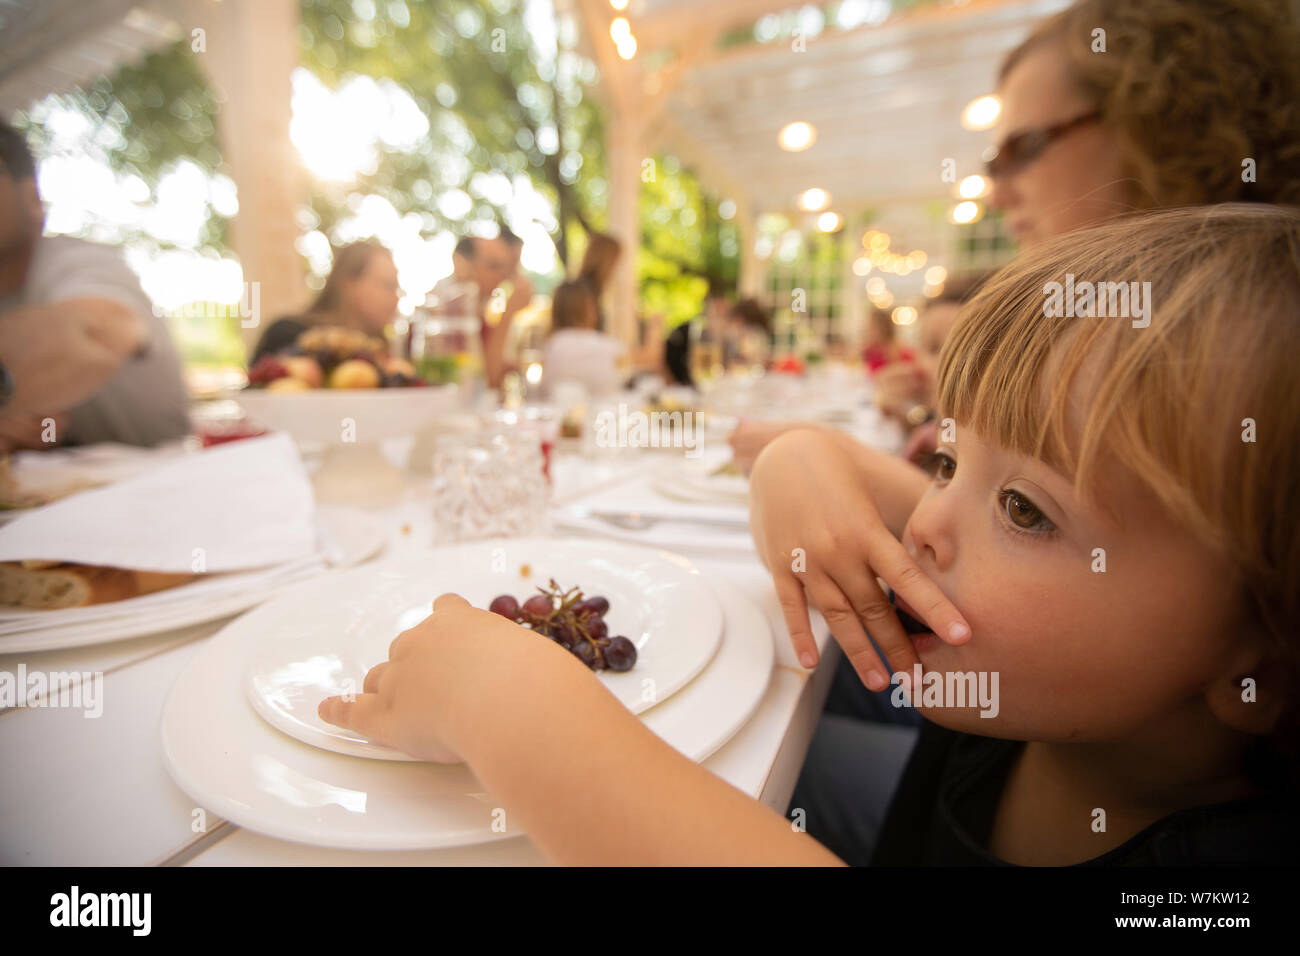 Curios kid eating grapes at table in outside restaurant Stock Photo